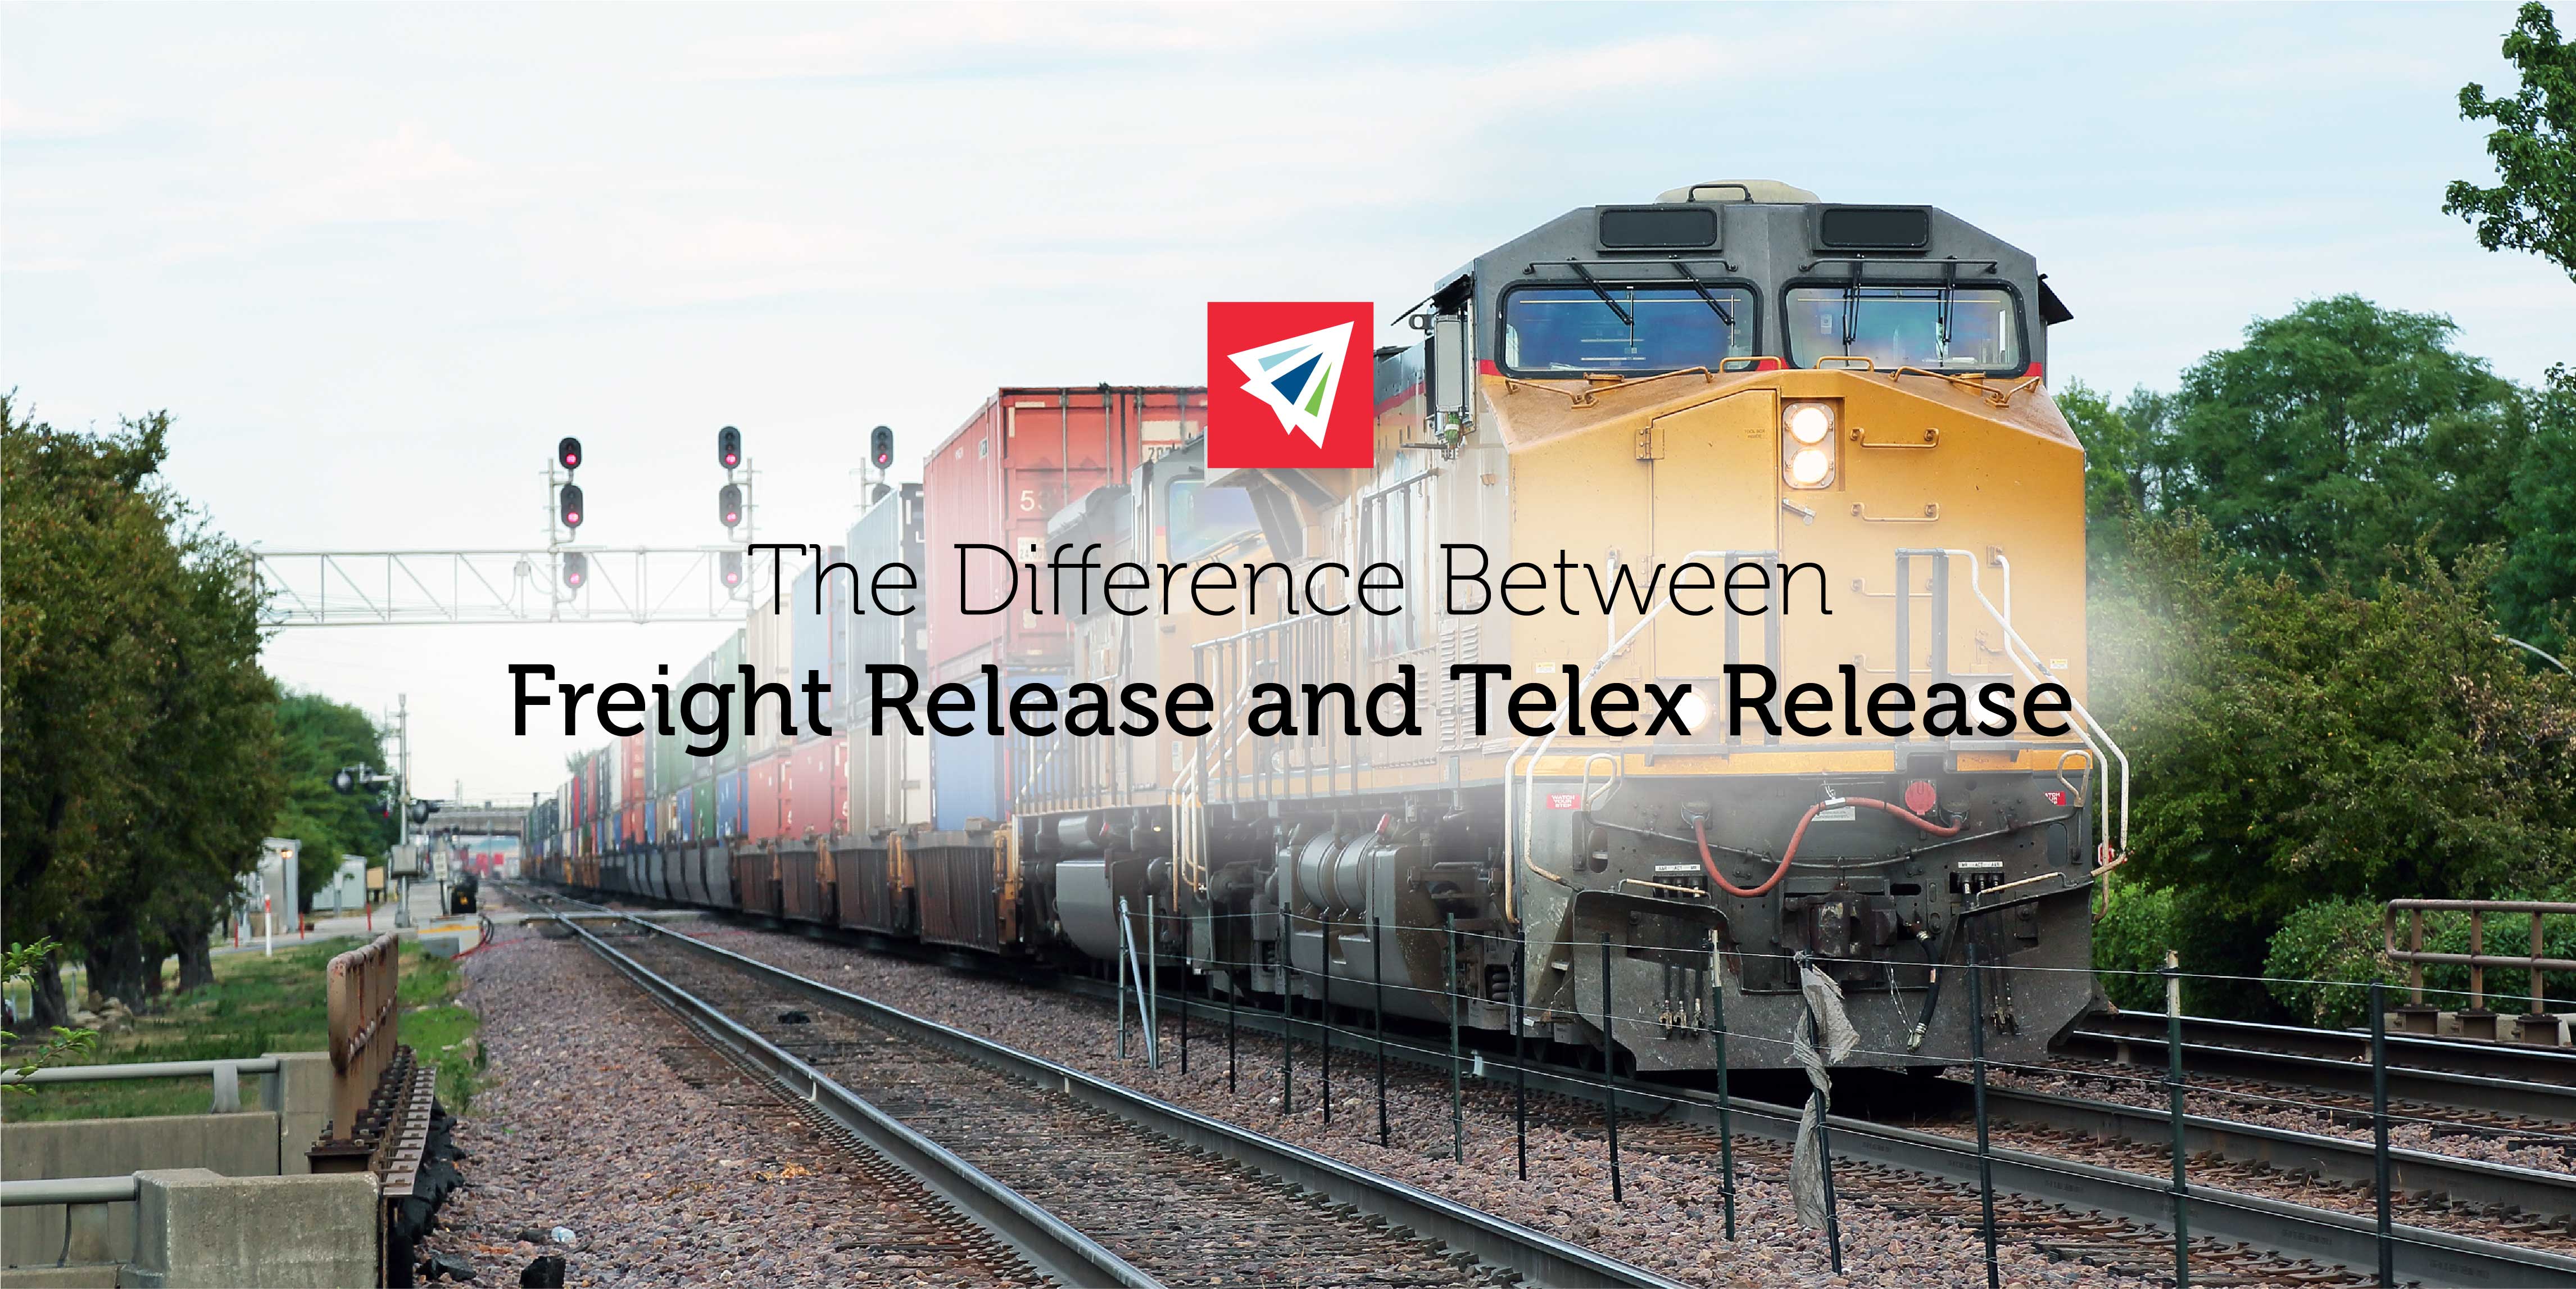 The Difference Between Freight Release and Telex Release